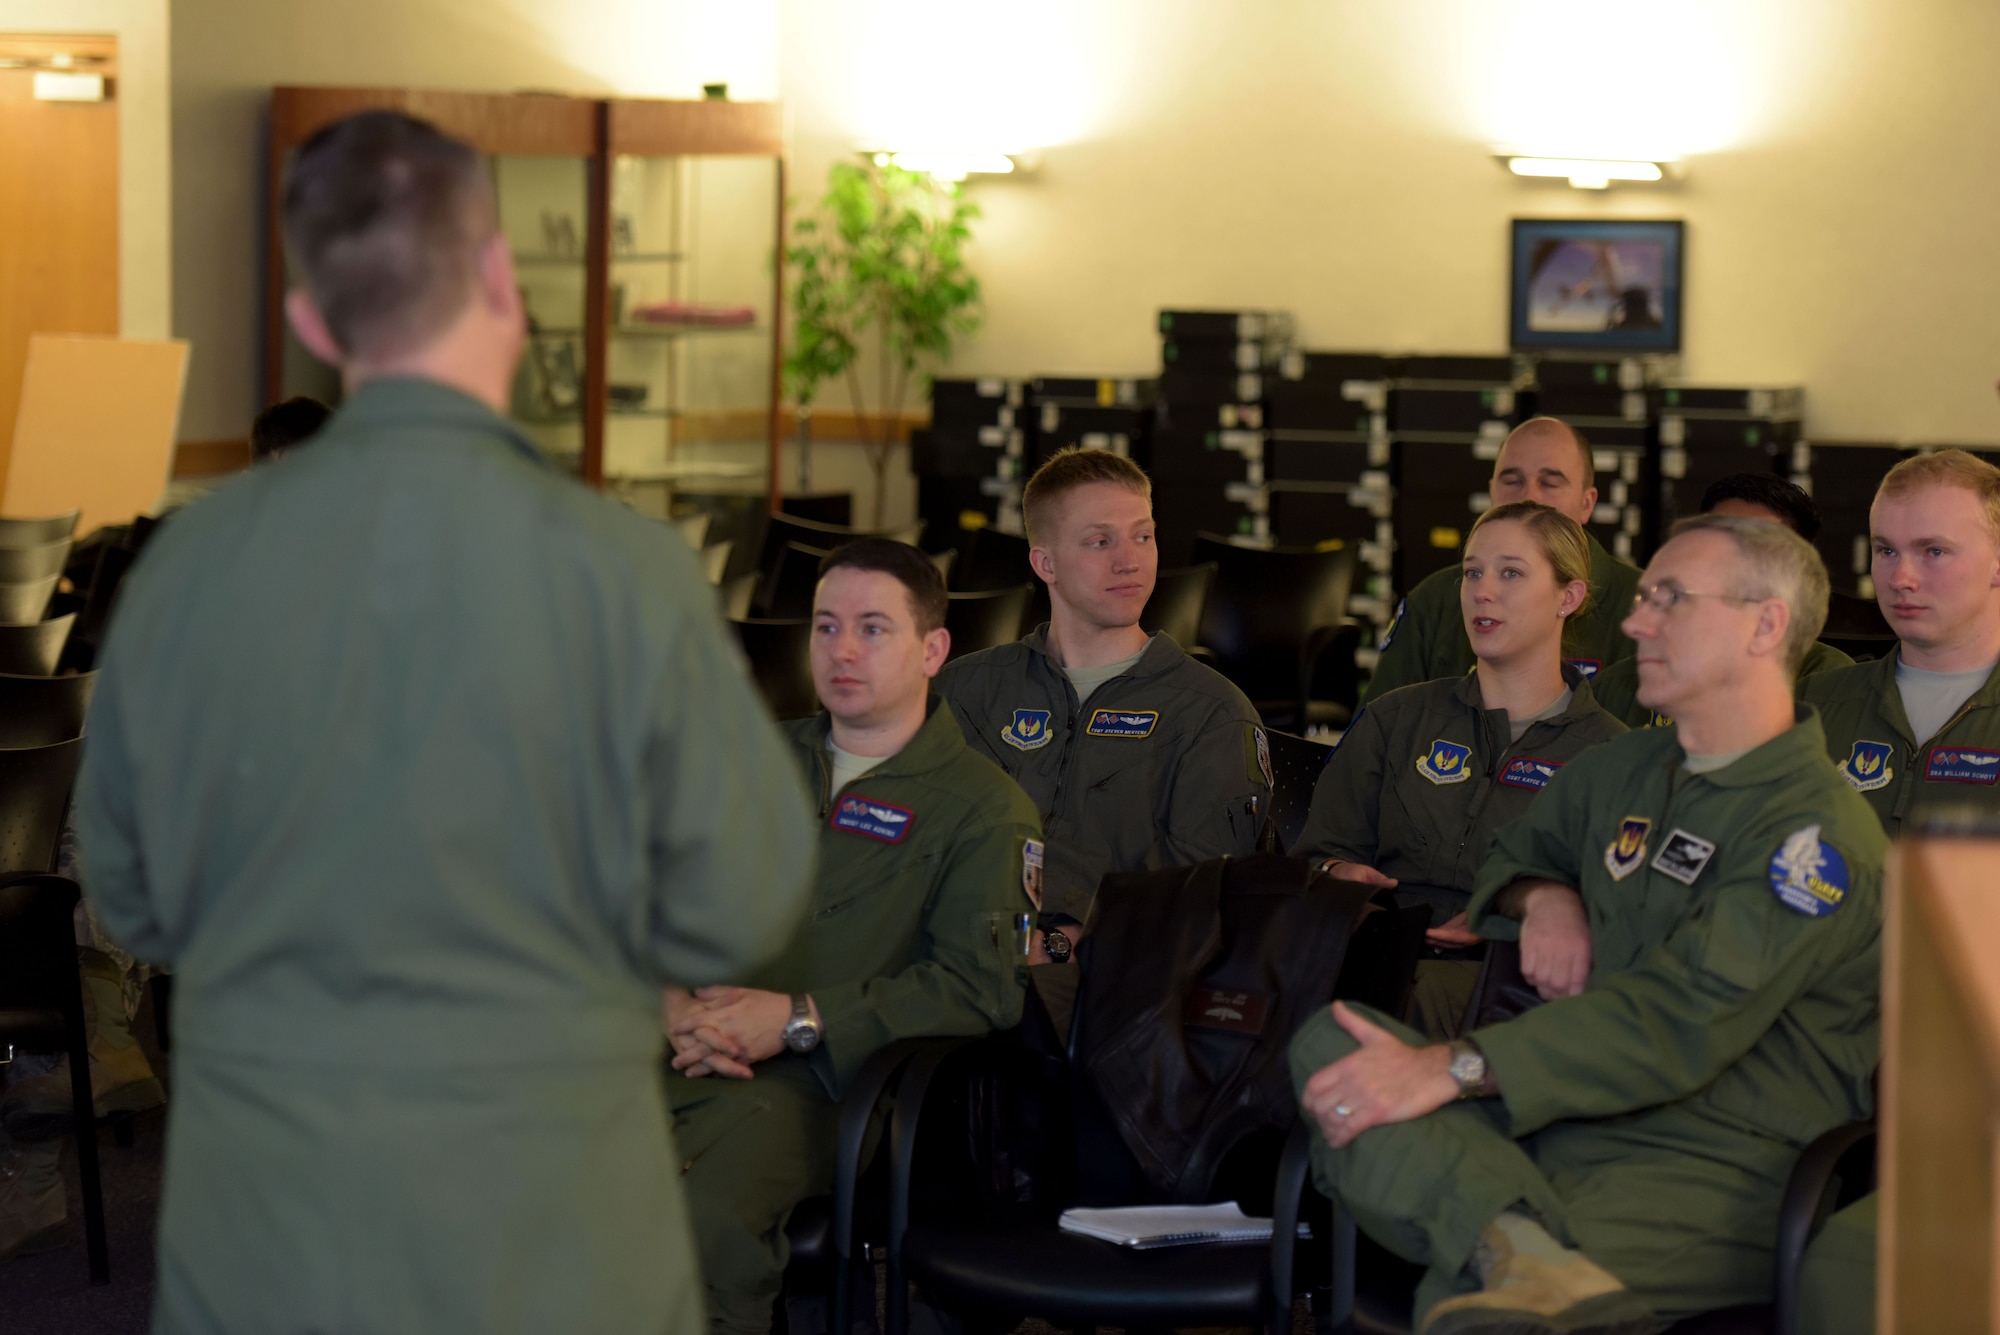 Airmen ask questions during a career enlisted aviator roadshow briefing at RAF Mildenhall, England, Feb. 8, 2018.  The question and answer session was one of three briefings during the senior enlisted leaders’ visit to discuss issues and programs pertaining to the CEA career fields. (U.S. Air Force photo by Senior Airman Alexandra West)